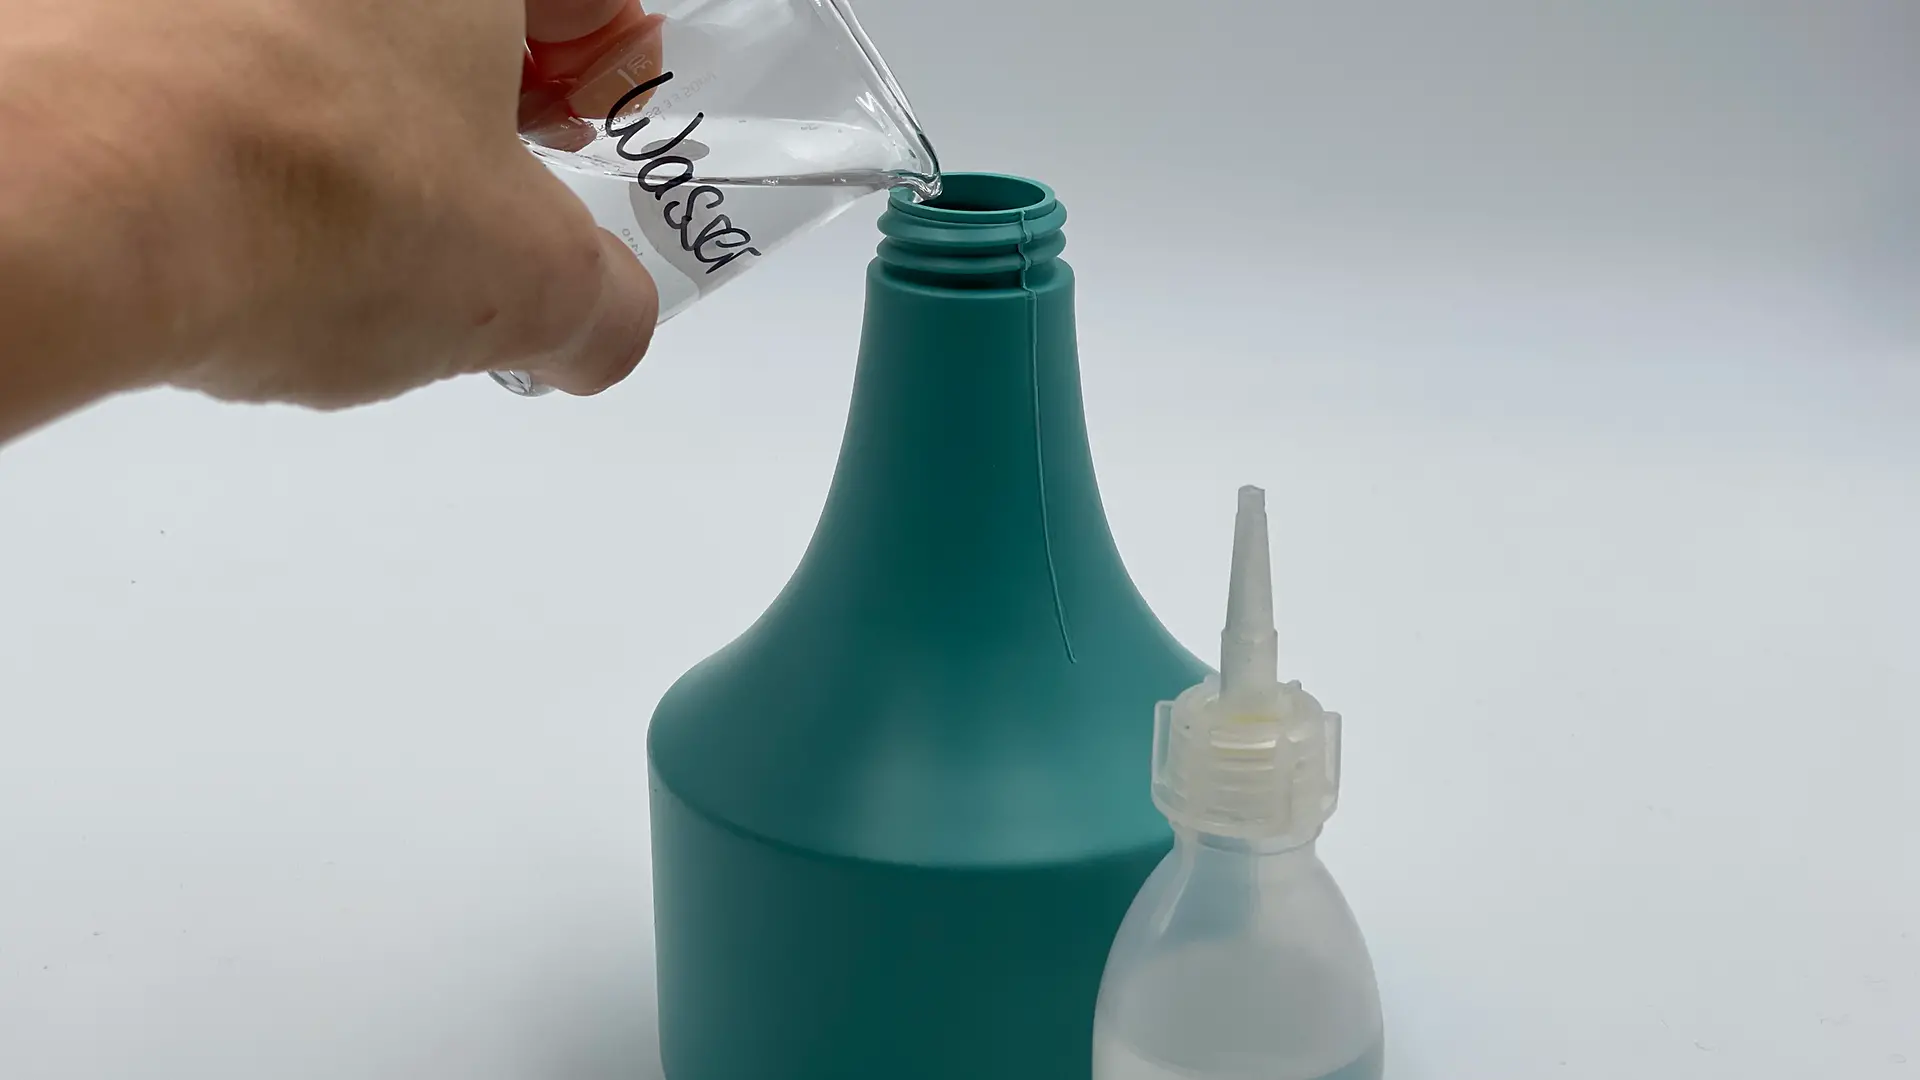 Spray bottle being filled with water and oil